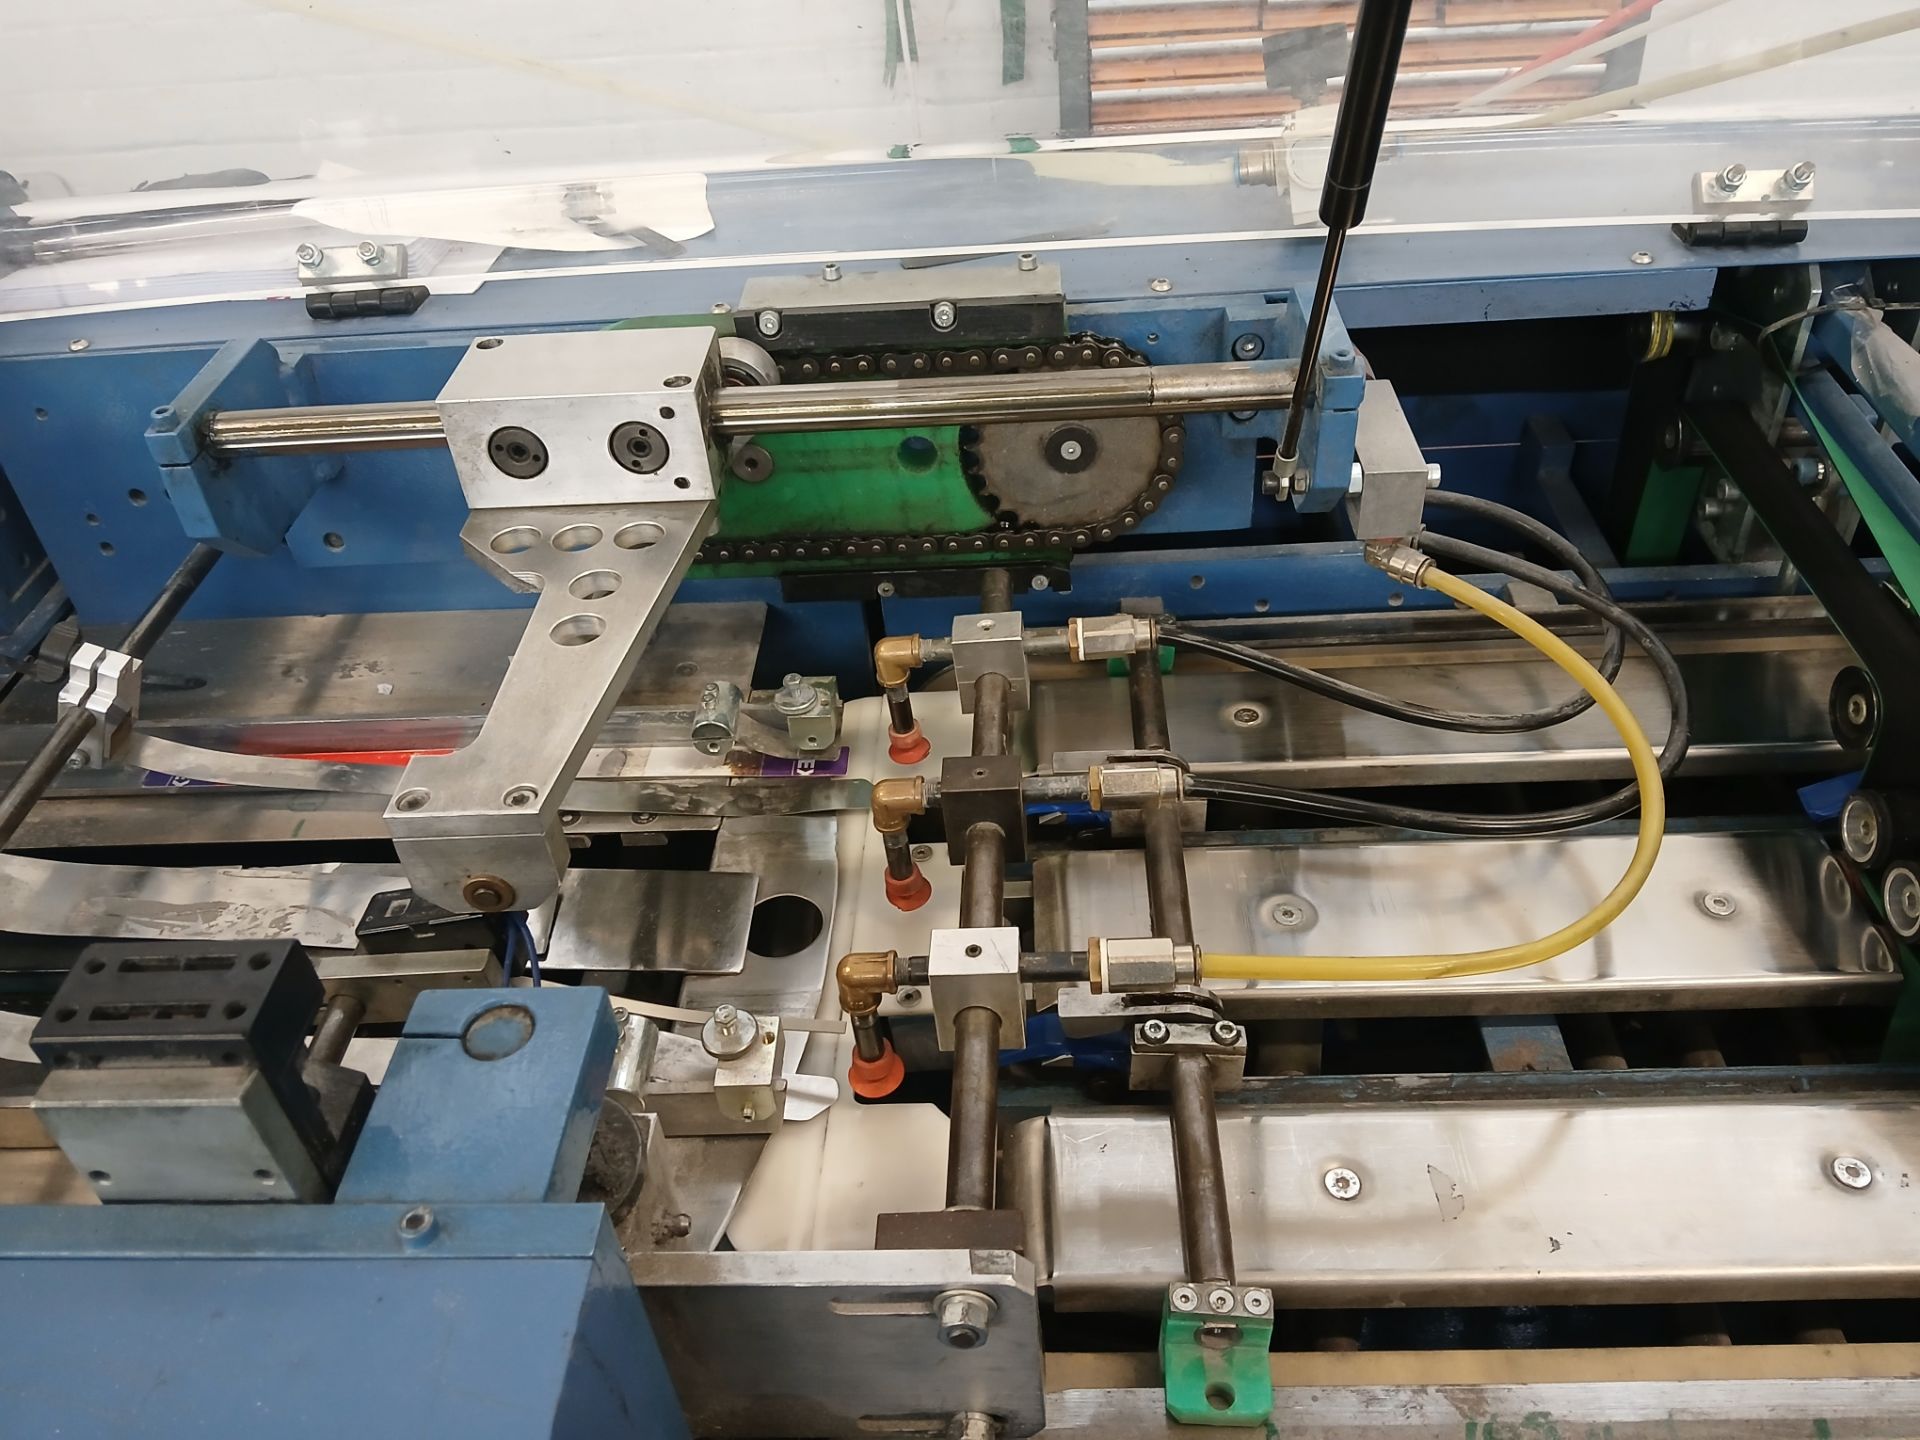 Buhrs/Promail BB300 6 station insertion line, Year believed to be 2001, with V710 feed unit and - Image 7 of 16